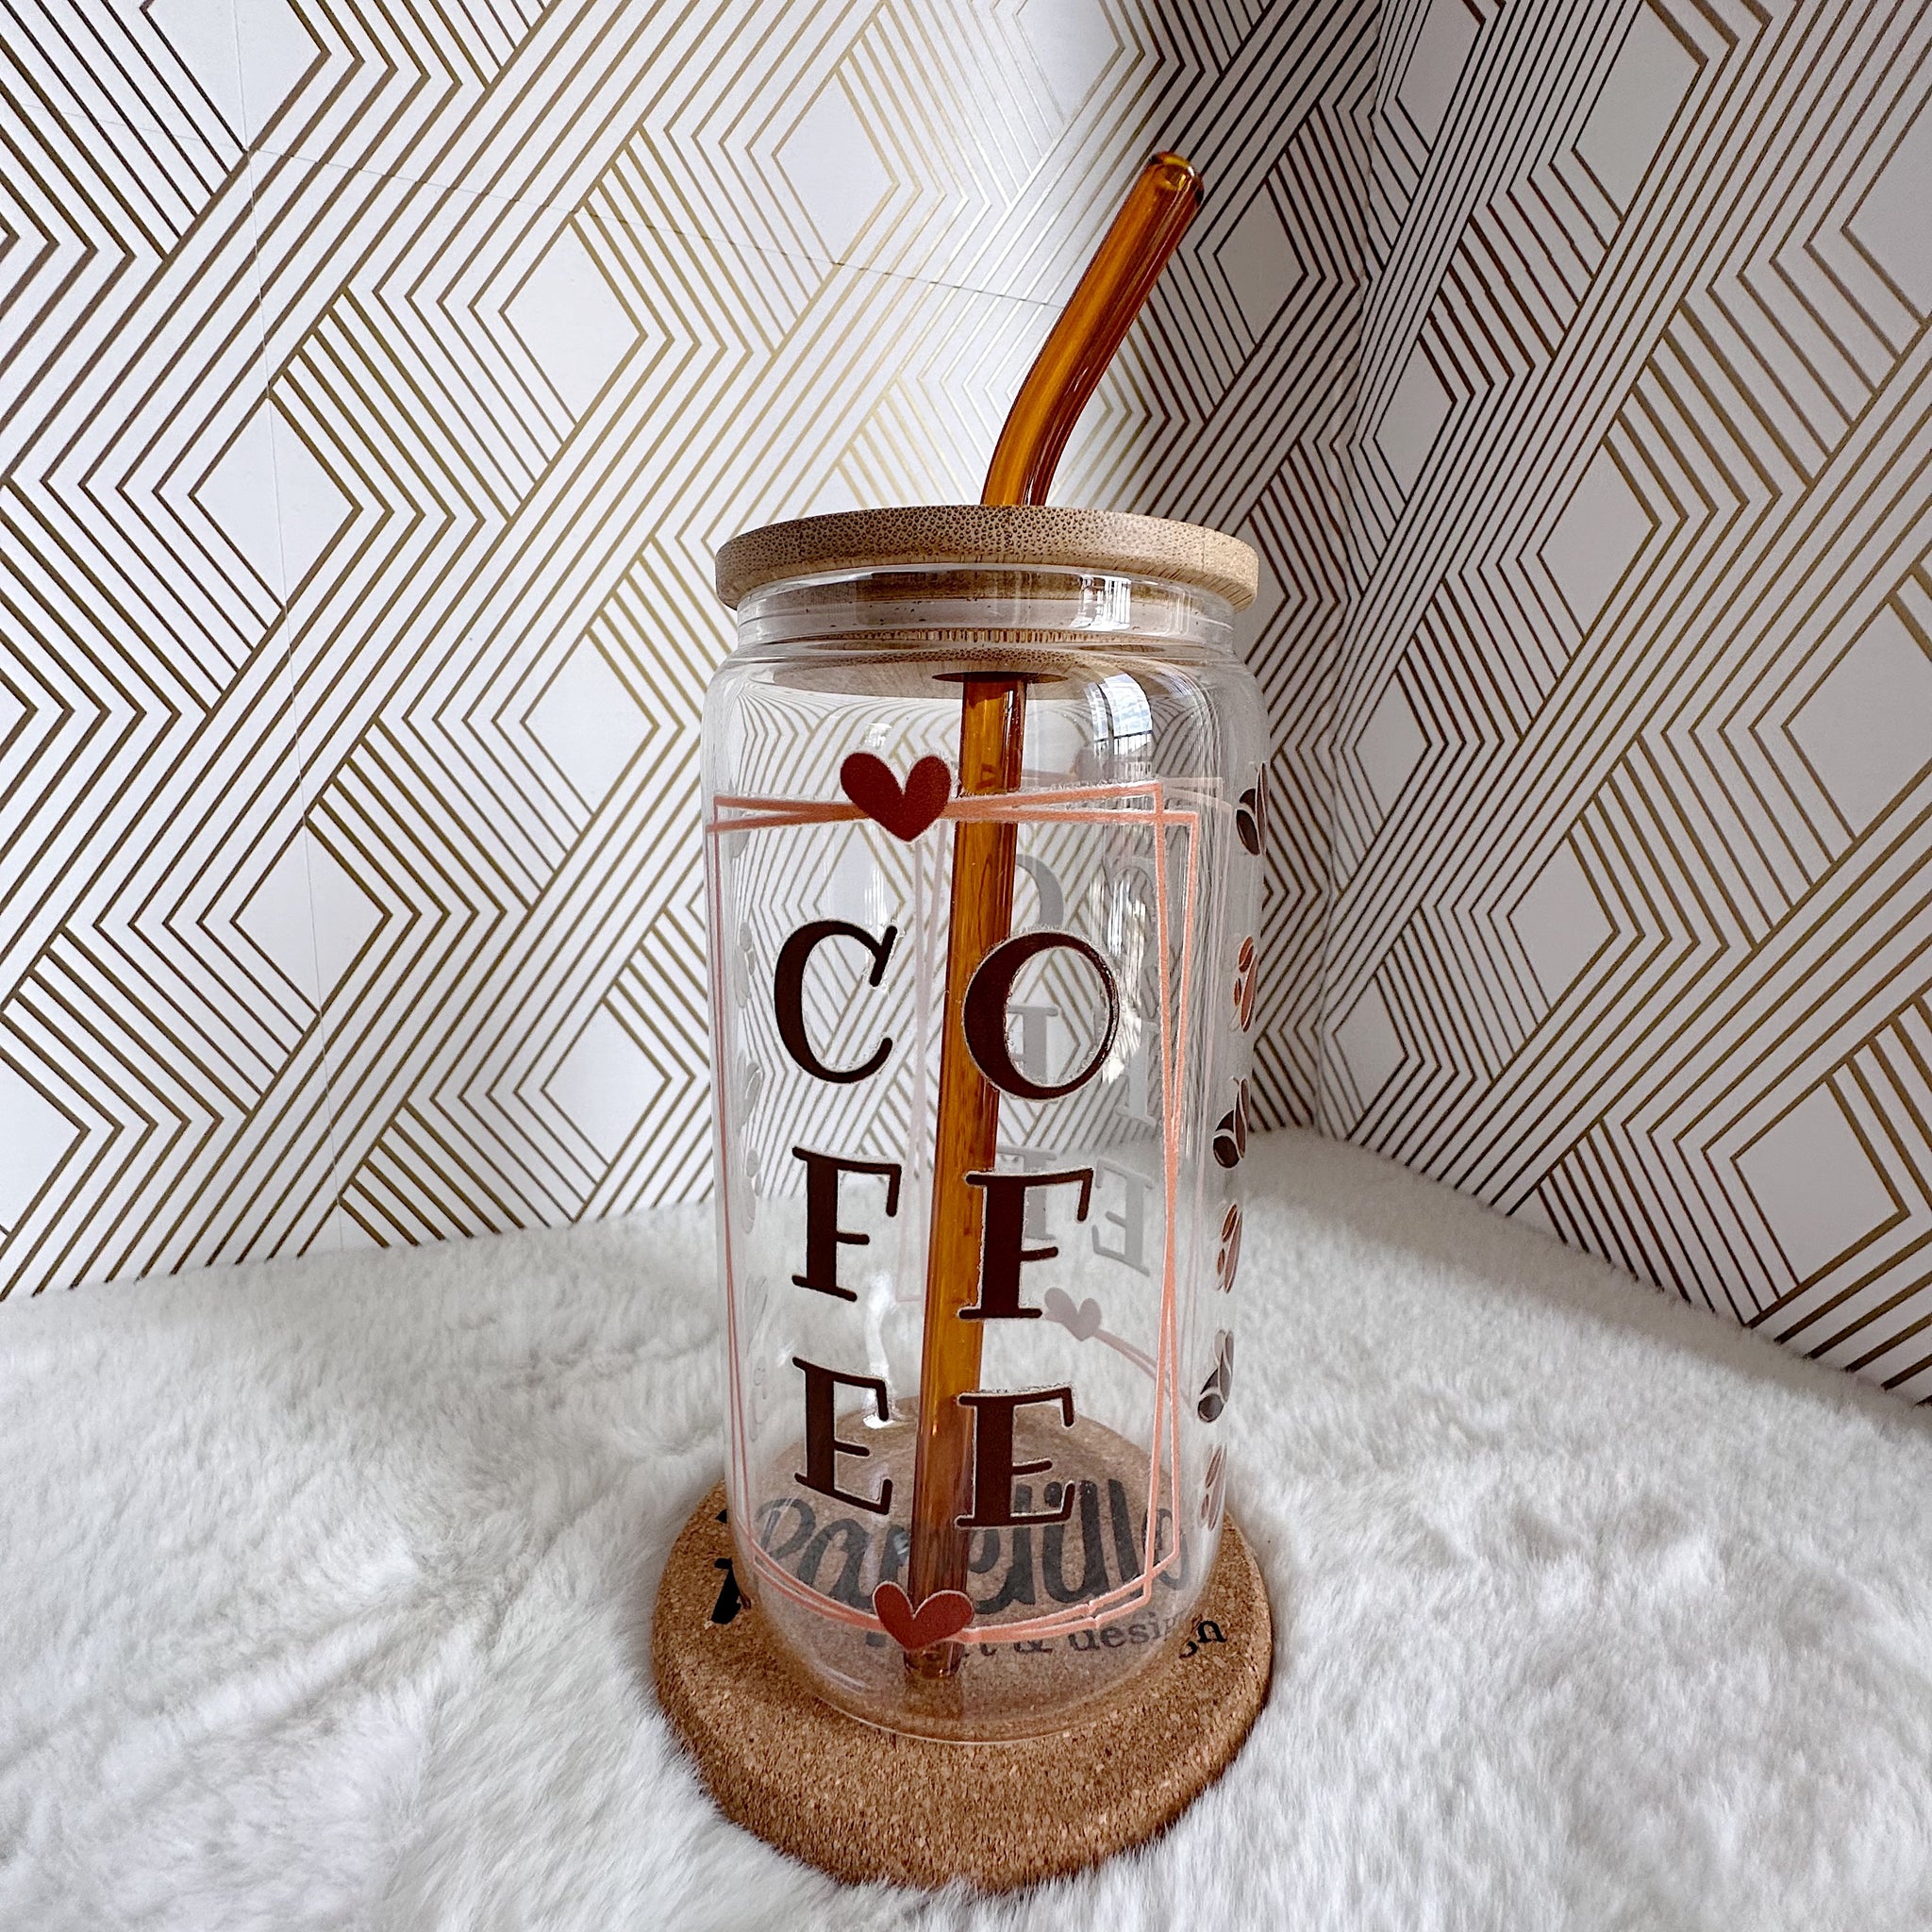 Personalized Glass Coffee Cup, Name Glass Iced Coffee Cup with Bamboo –  Papelillo Art Design